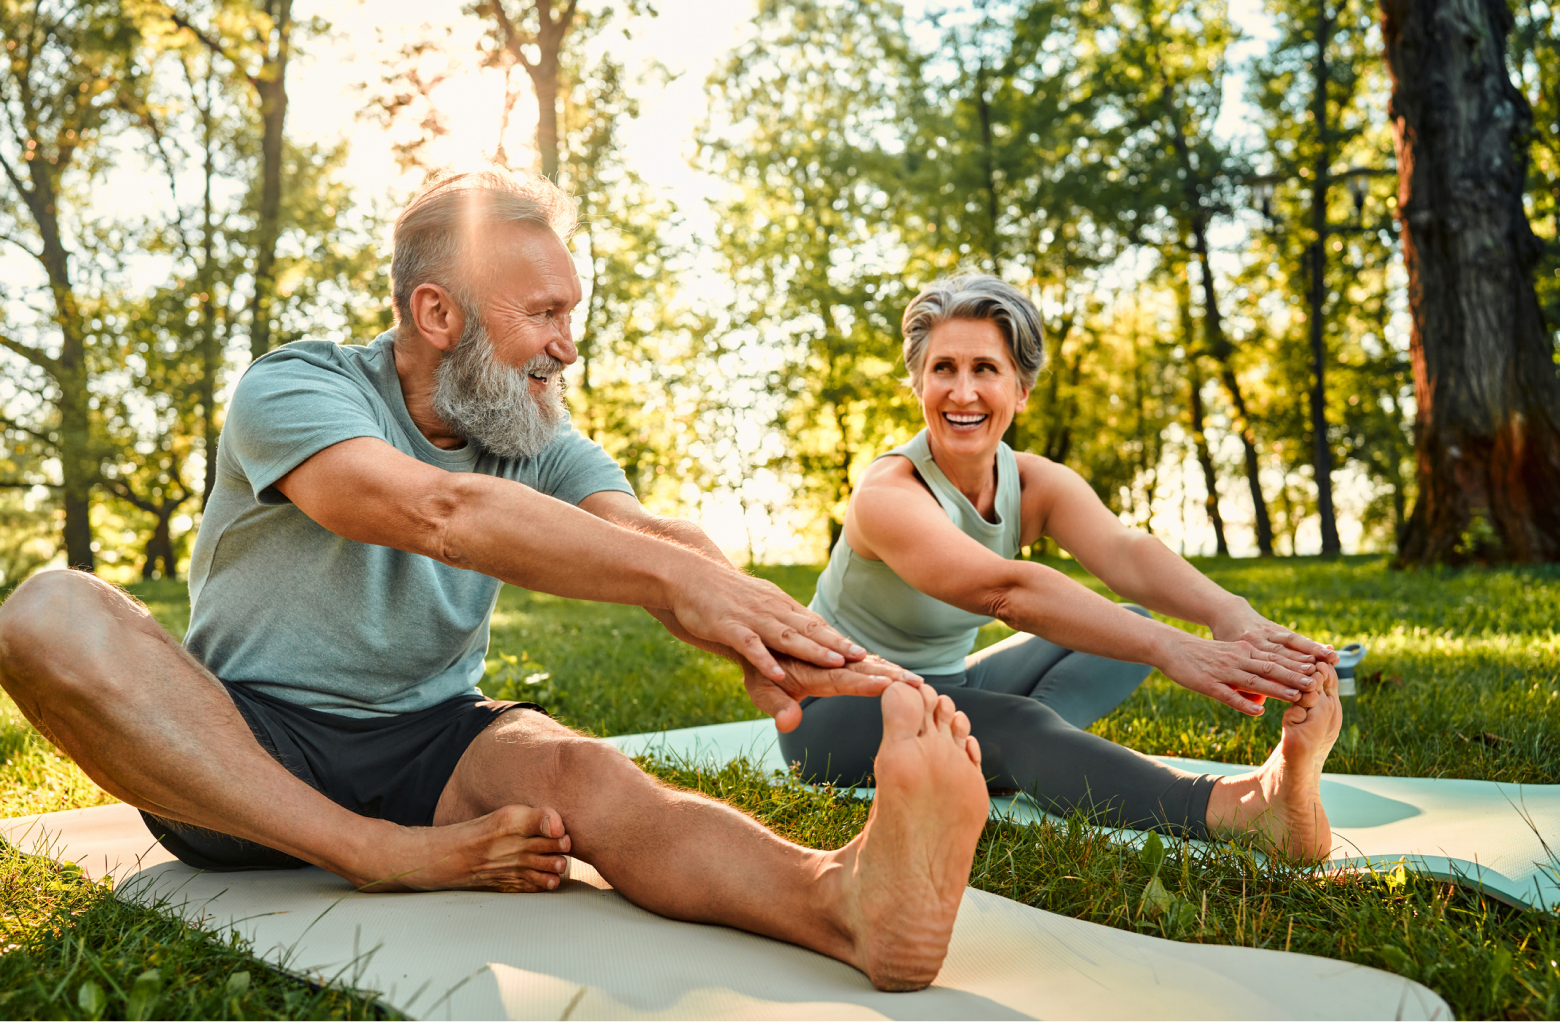 A mature couple stretches on matching yoga mats under the trees